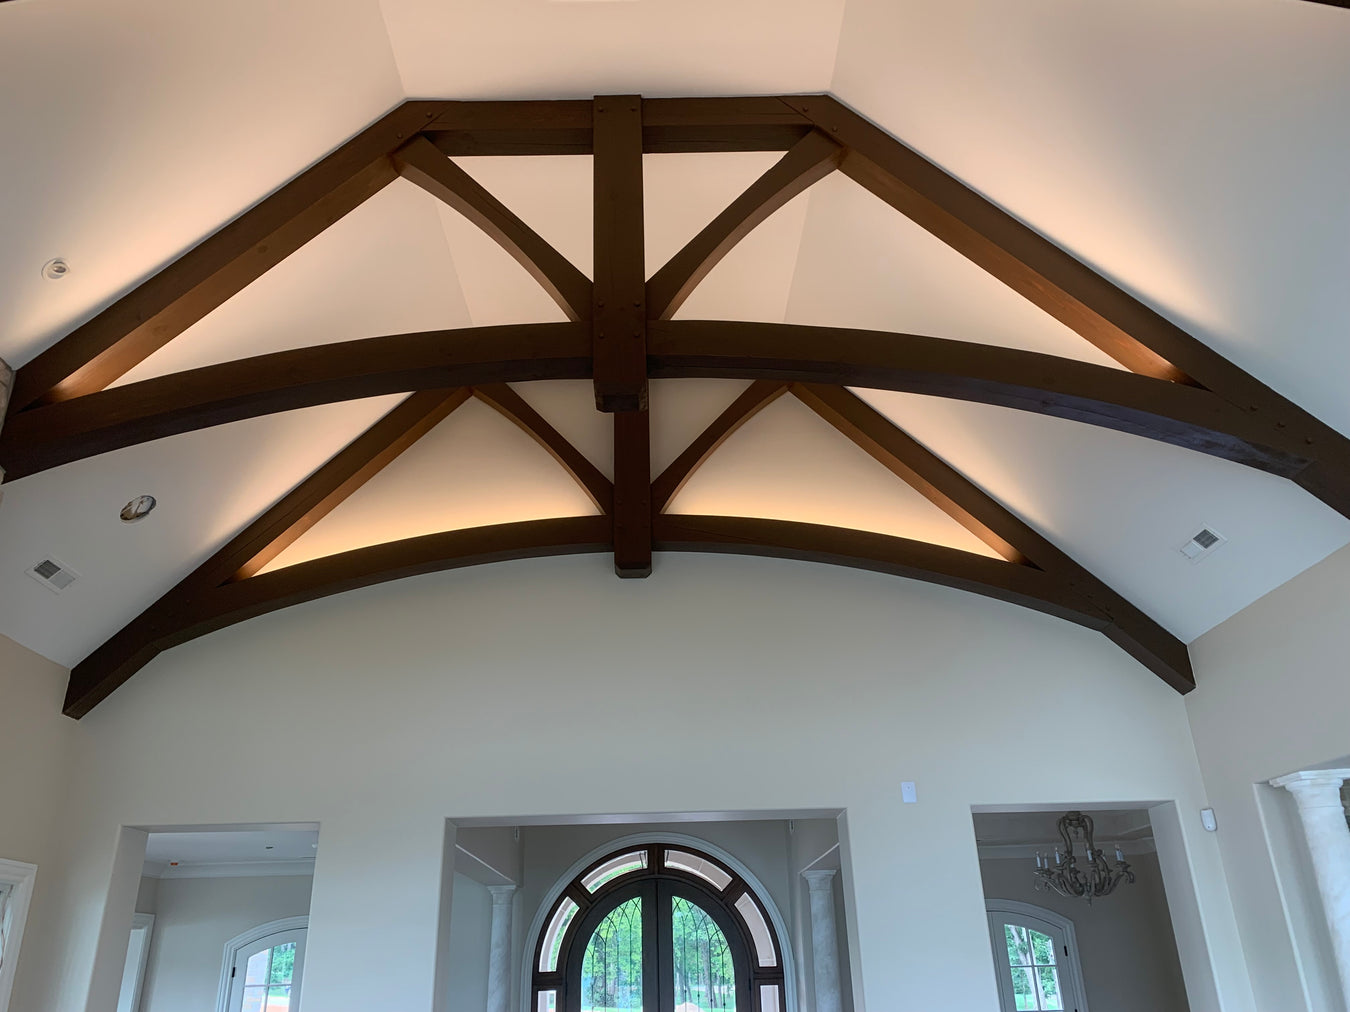 Barrel-Vaulted Ceiling Lights | Wired4signs USA